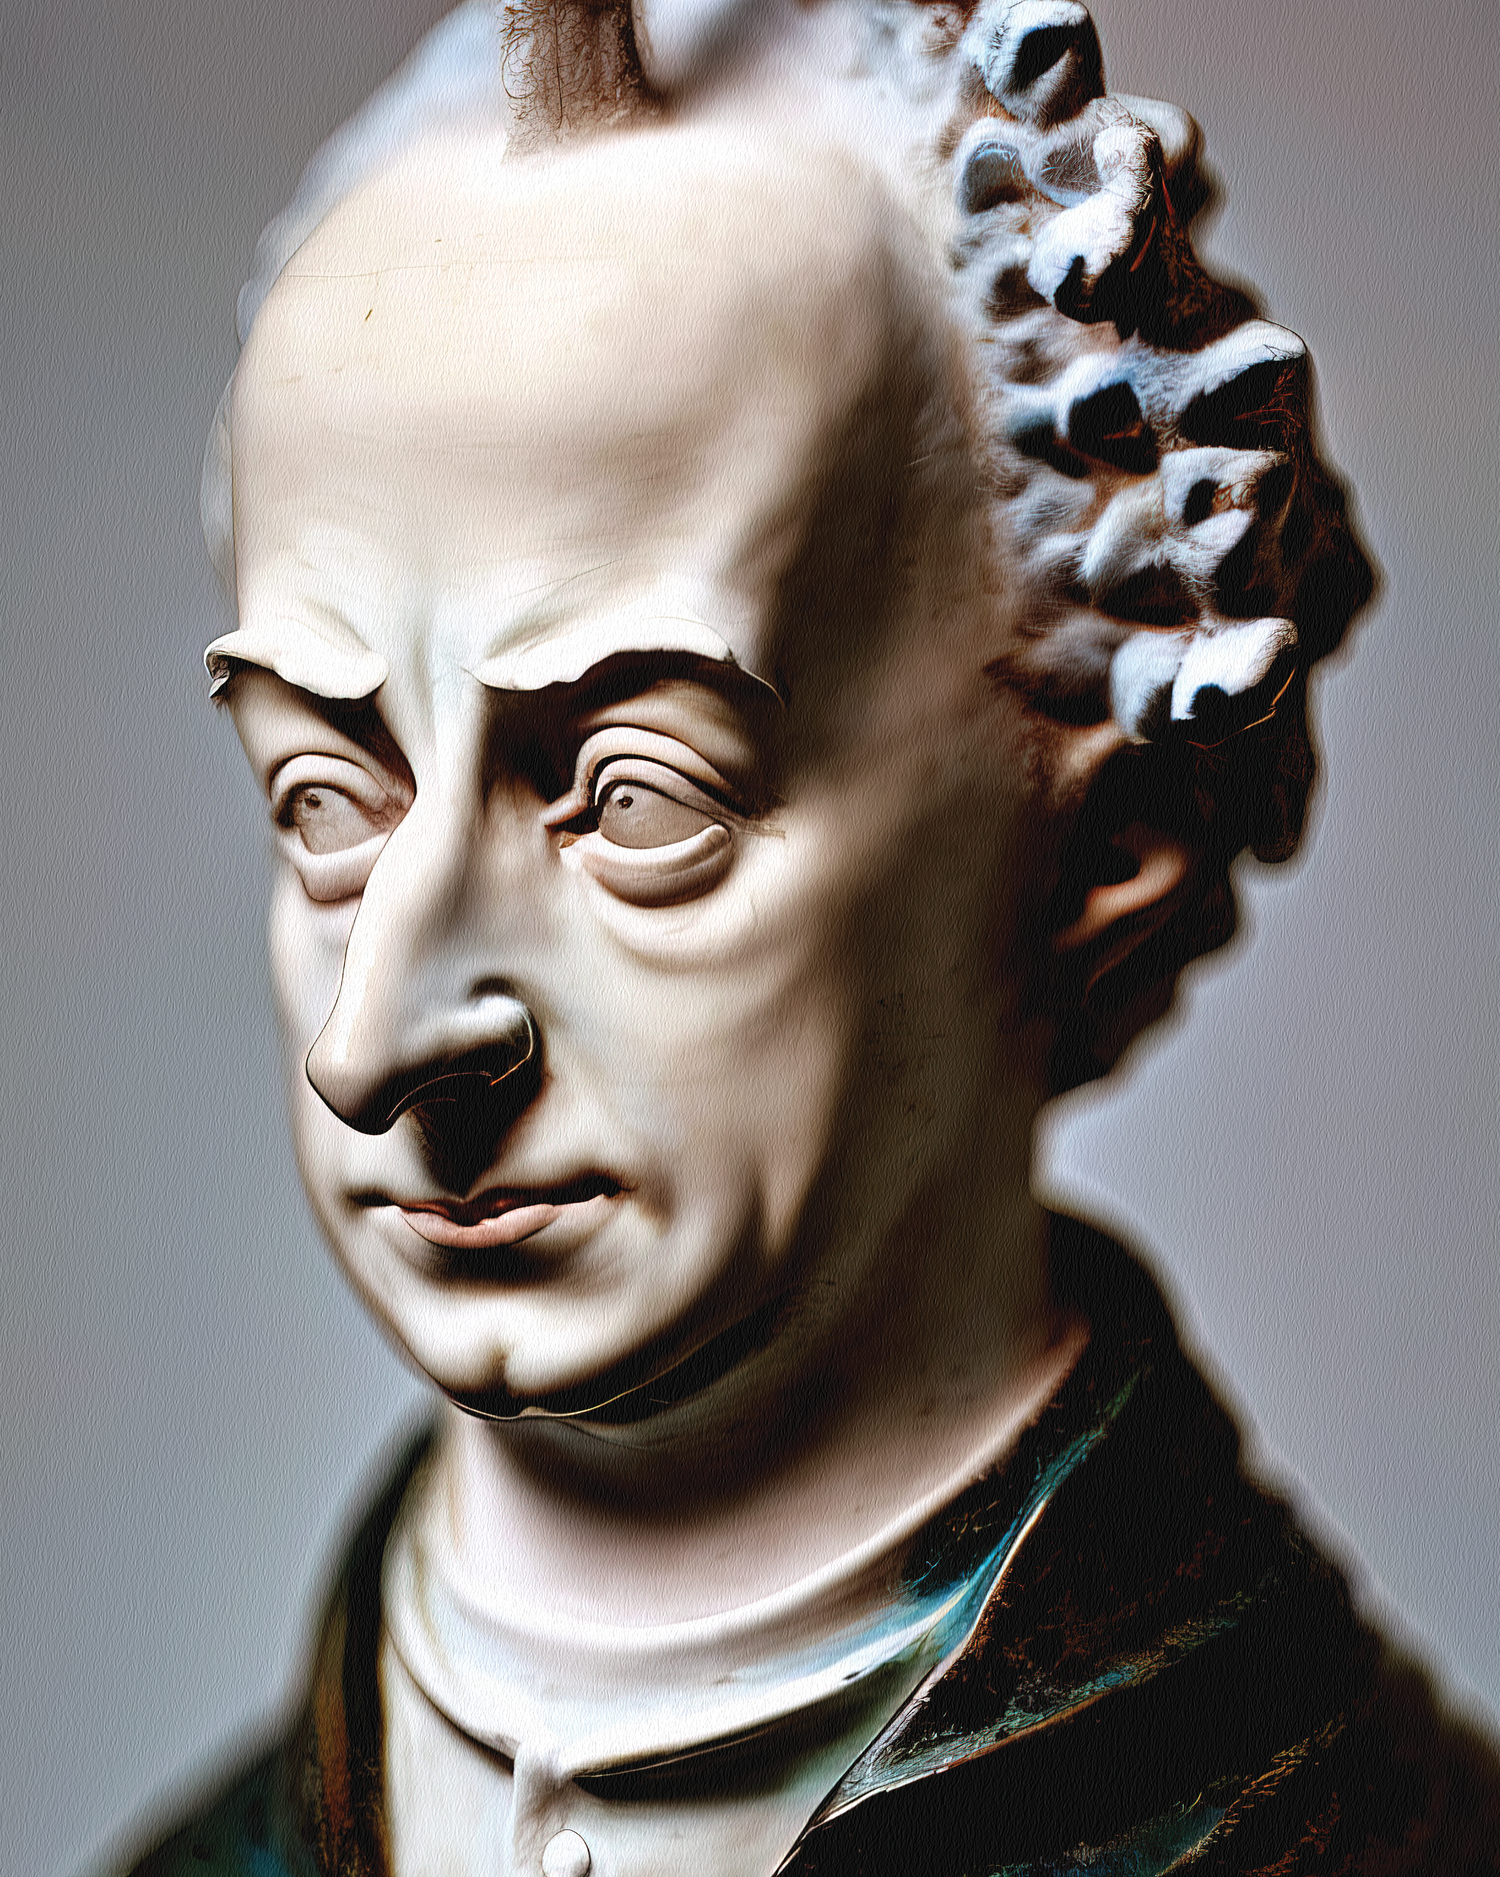 An AI generated image of a porcelain head of german philosopher Immanuel Kant